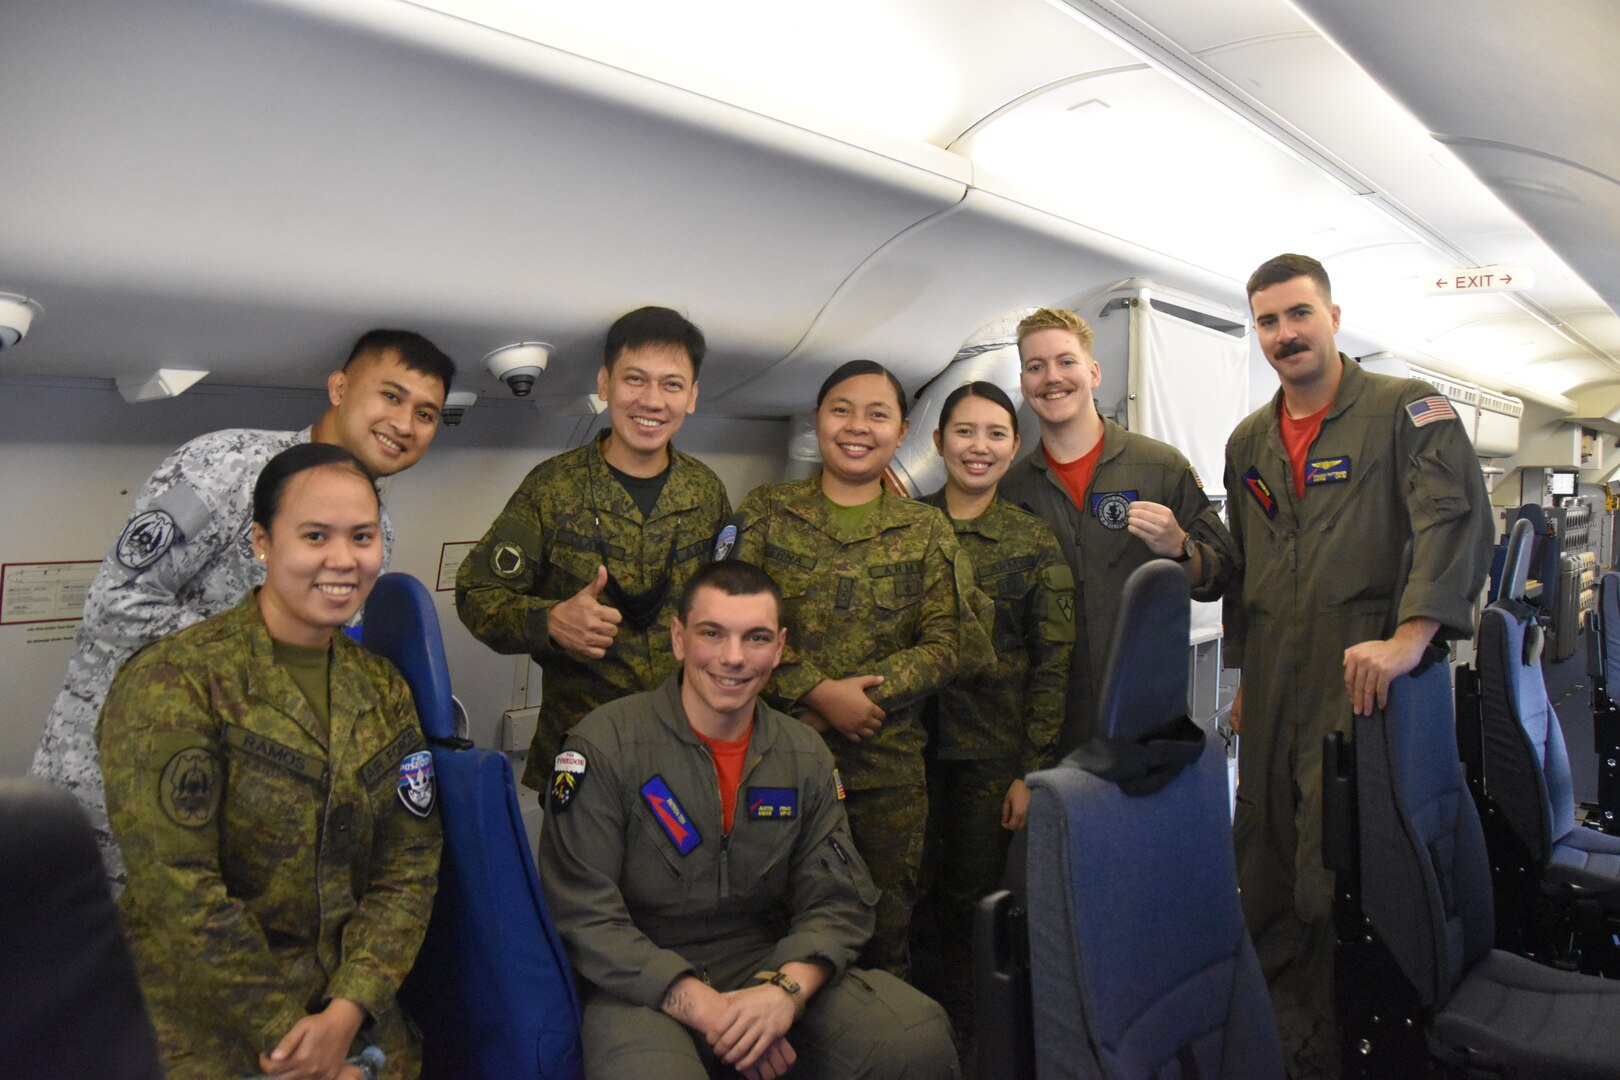 Sailors of Combat Air Crew Eleven, assigned to the “Red Lancers” of Patrol Squadron (VP) 10, and members of the Armed Forces of the Philippines pose for a photo during a joint Philippine Sea operational flight as part of a weeklong engagement promoting joint regional security and partnerships out of Mactan, Philippines. VP-10 is based in Jacksonville, Florida and is currently operating from Kadena Air Base in Okinawa, Japan. It conducts maritime patrol and reconnaissance, as well as theater outreach operations, as part of a rotational deployment to the U.S. 7th Fleet area of operations. (U.S. Navy photo by Lt. j.g. Travis Goebel)